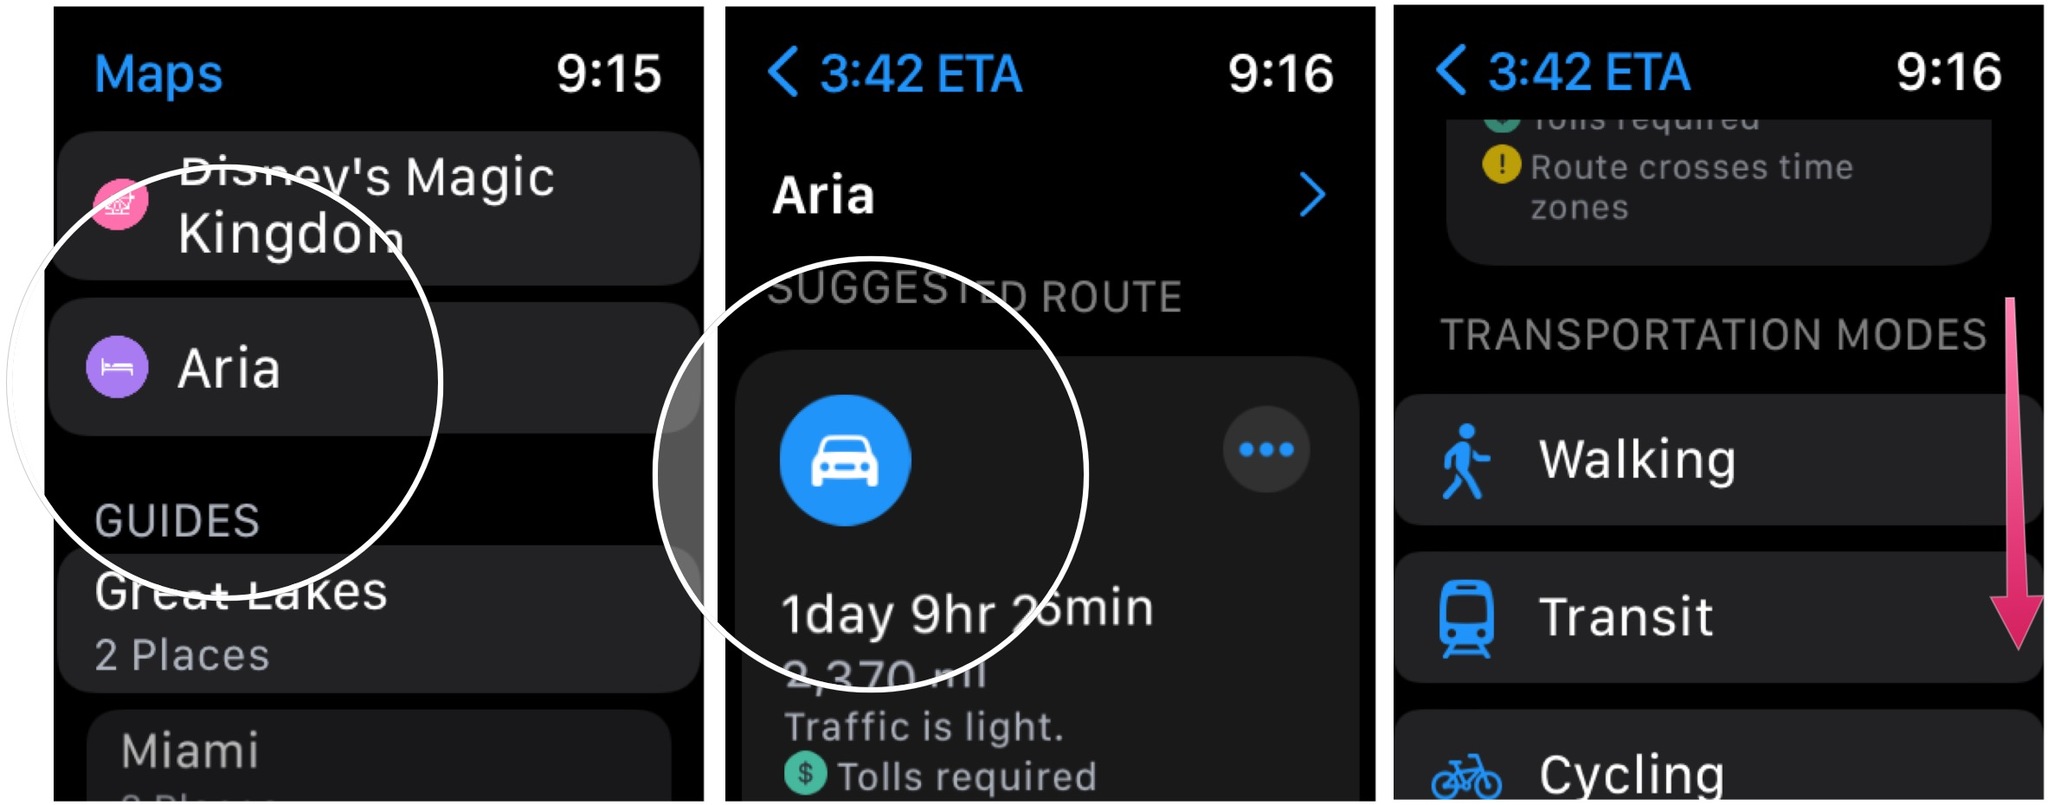 To open the Maps app on Apple Watch, choose a location, then tap on a suggested route, choose a route to get started. 